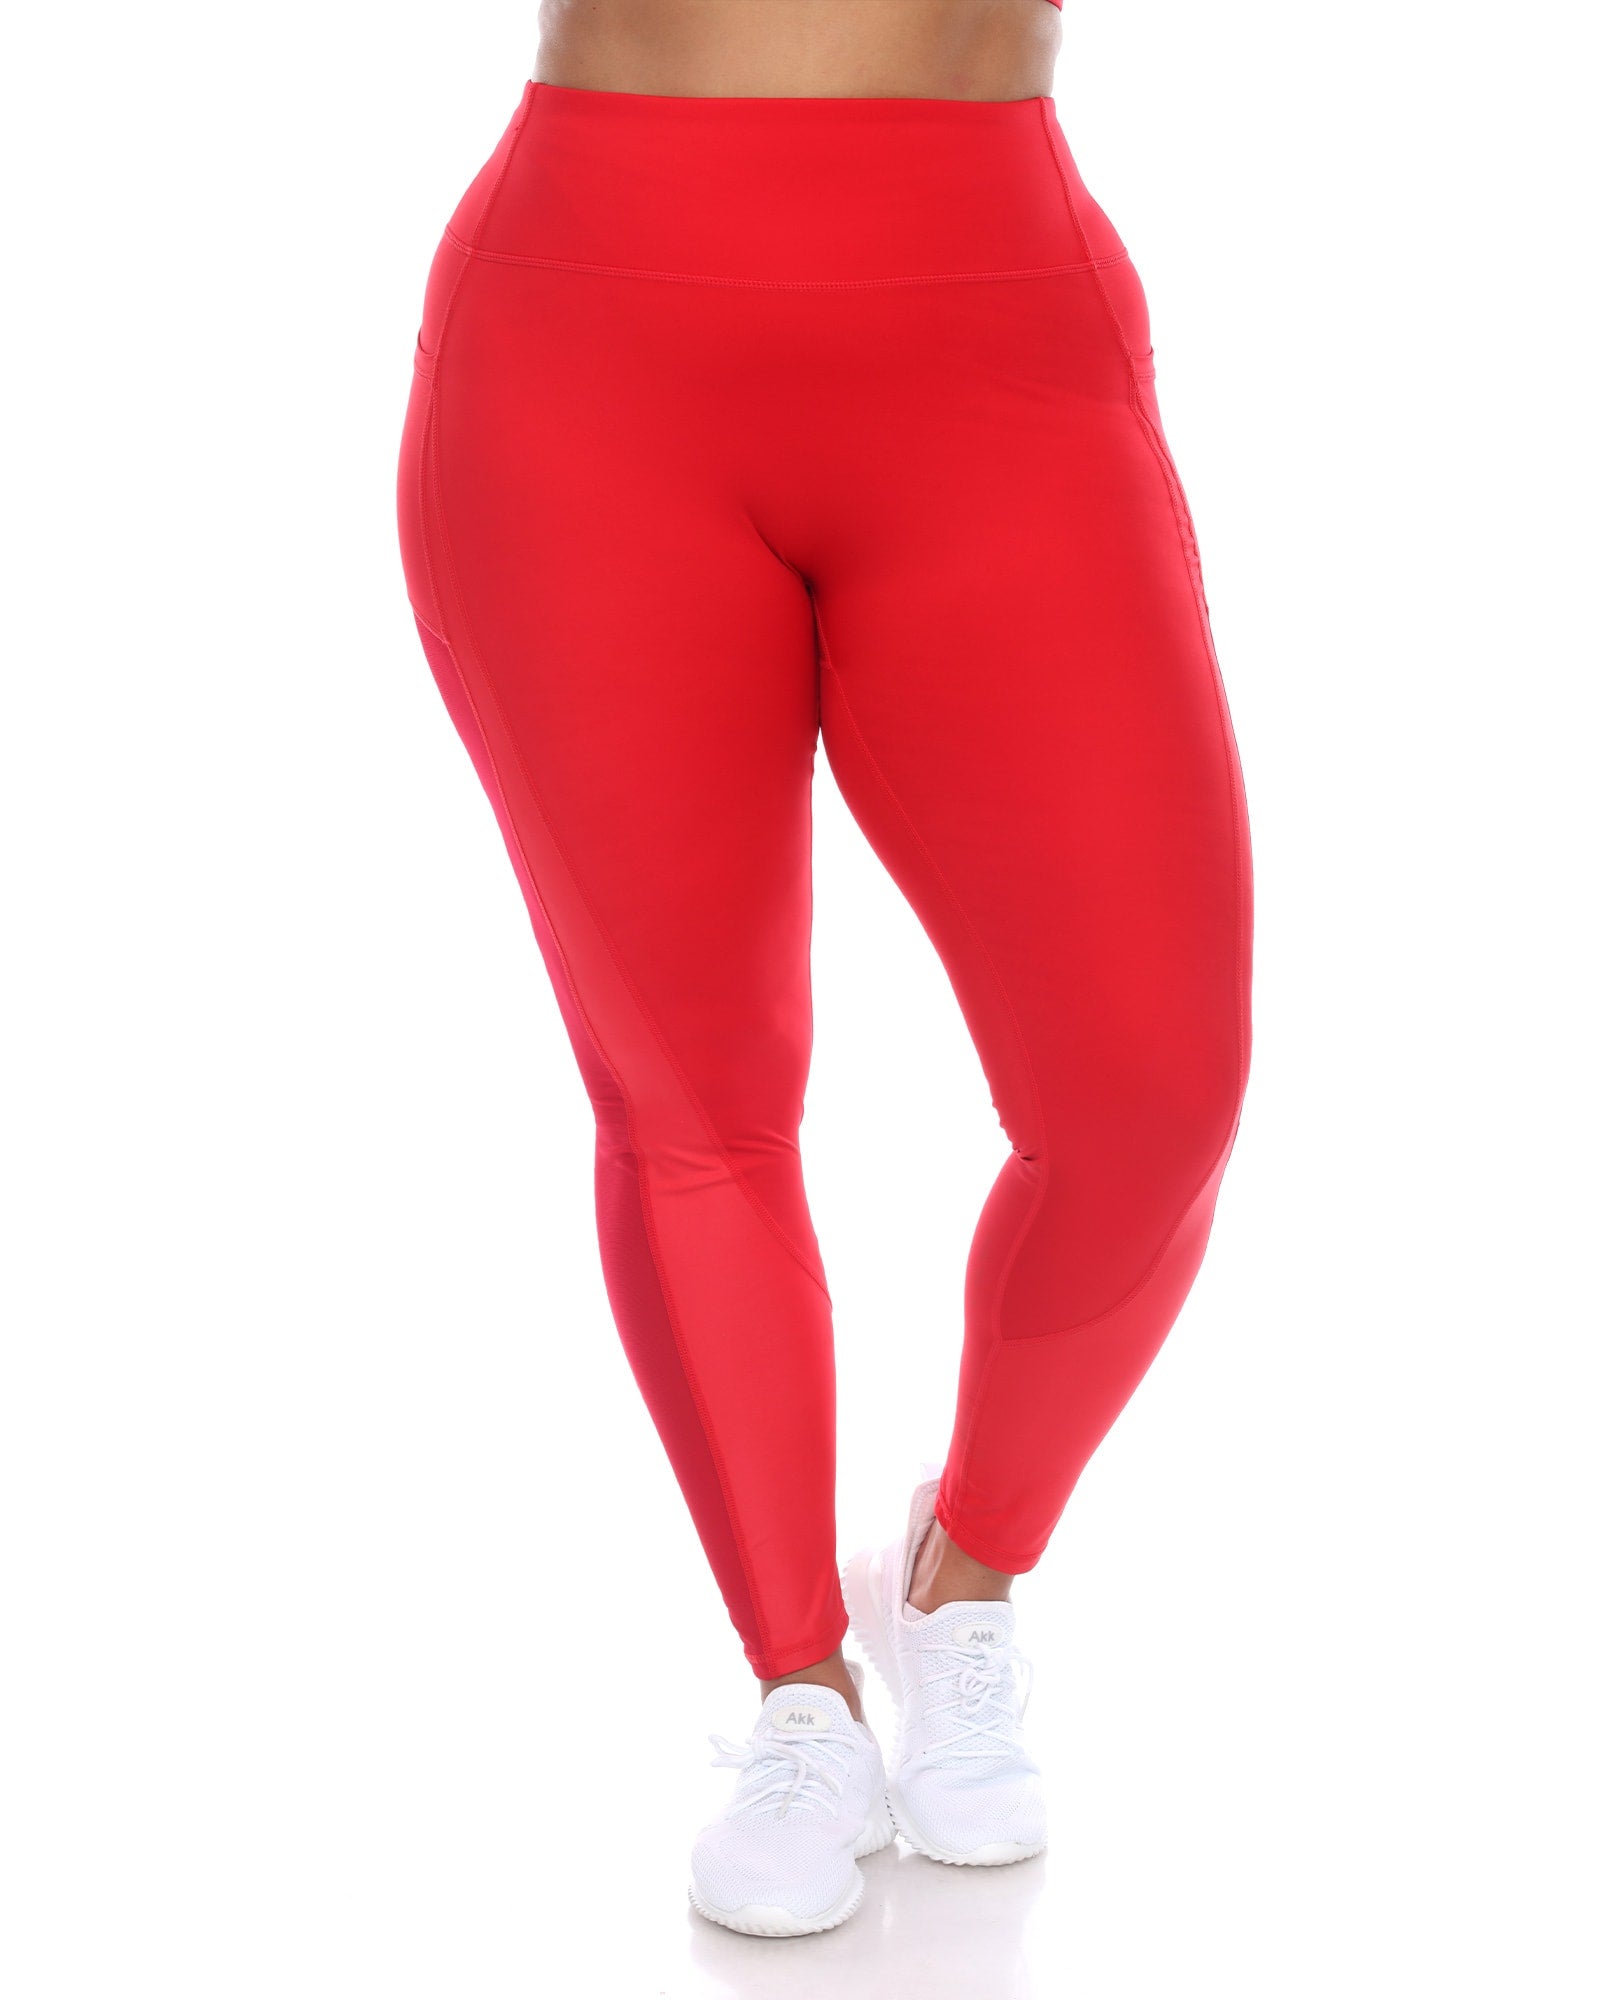 Women's Valentine's Day Lovesy plus Size Yoga Pants with Pockets